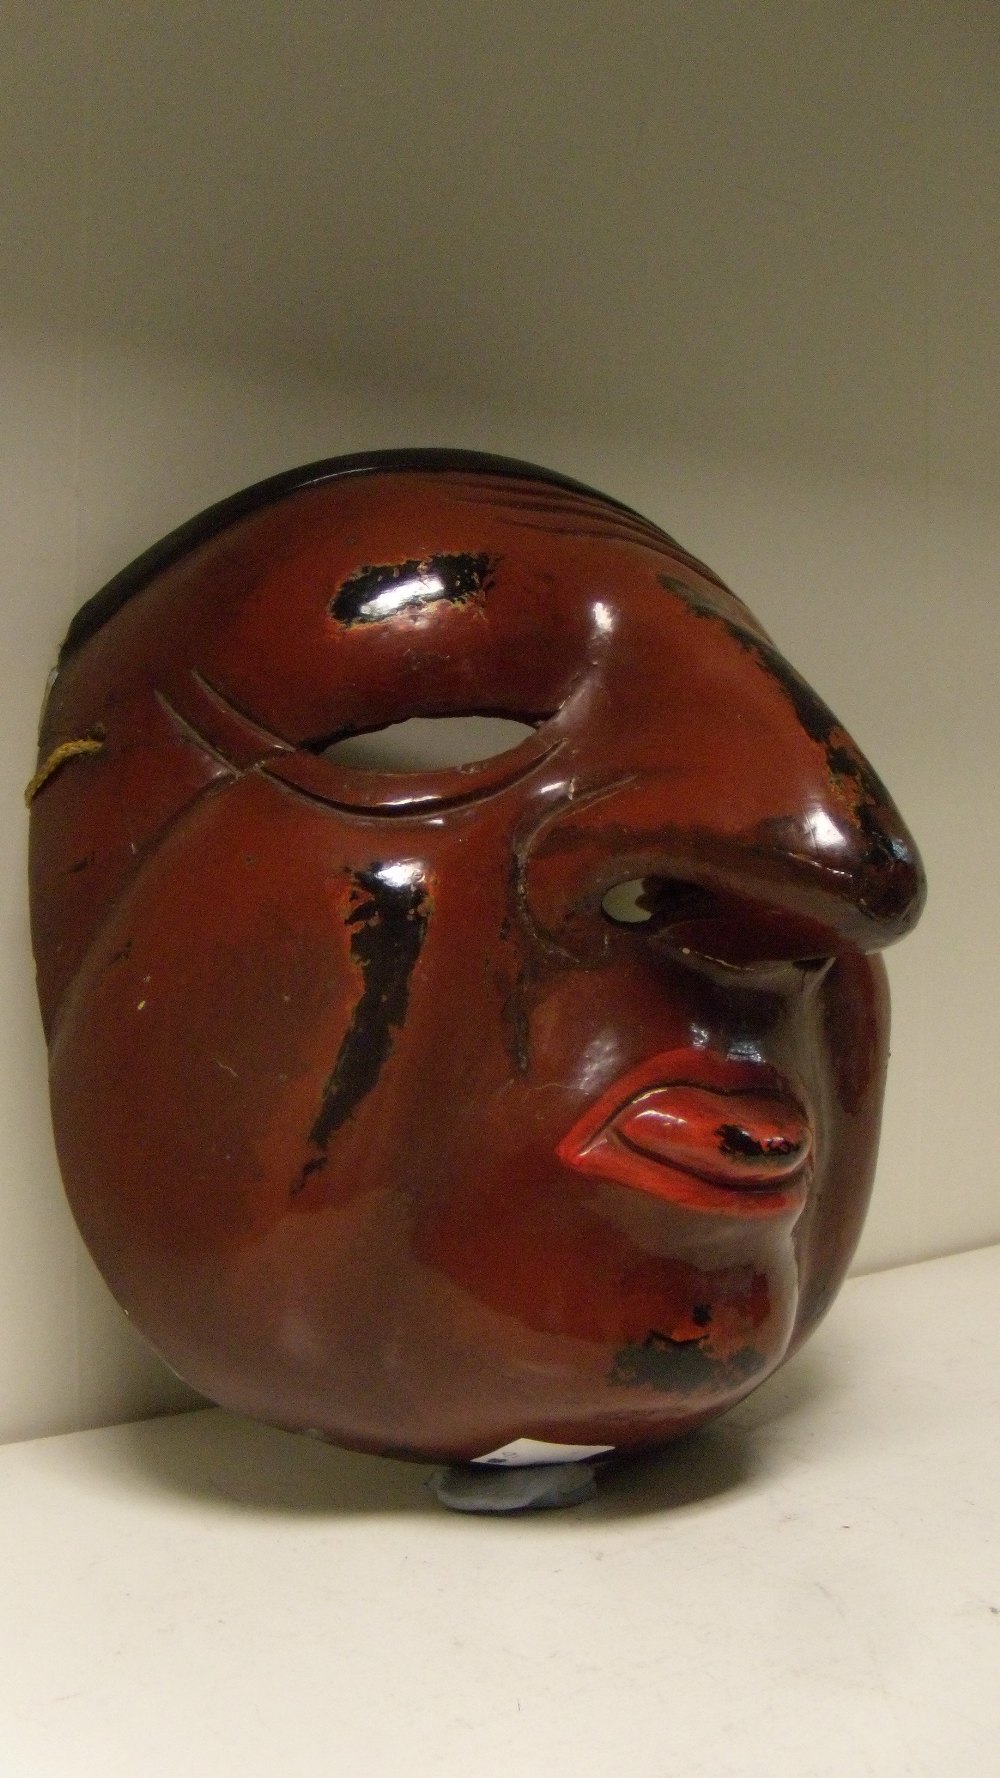 A lacquer mask, possibly of Shin Sotoku, a red tongue protuding from the brown face with black hair, - Image 2 of 4